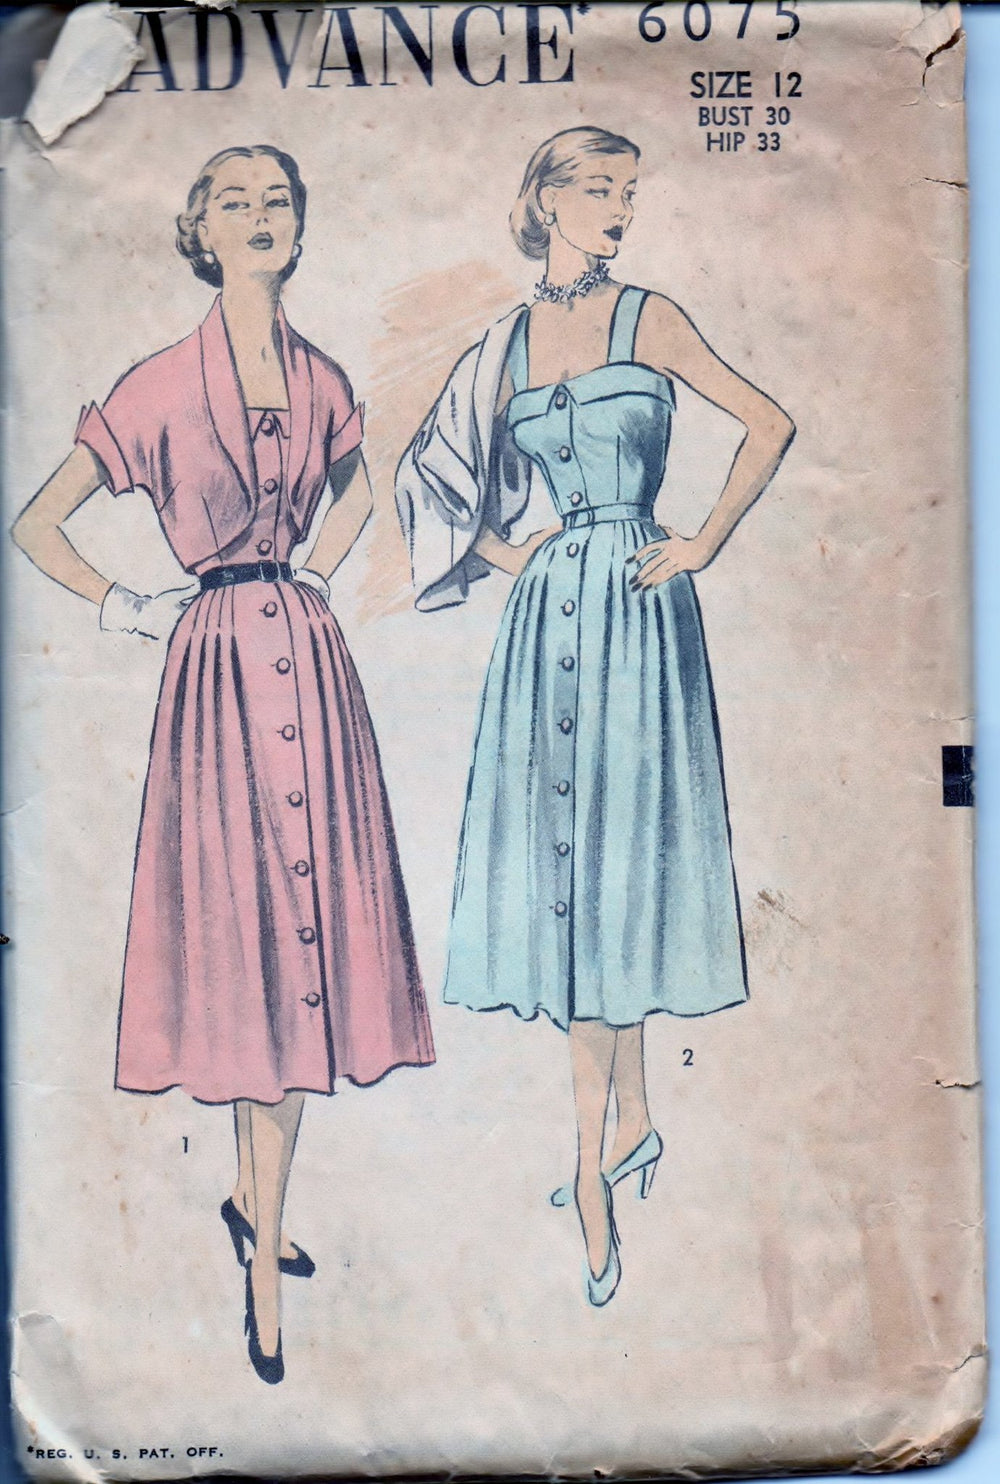 Advance 6075 Ladies Front Buttoned Sun Dress Bolero Jacket Vintage 1950's Sewing Pattern - VintageStitching - Vintage Sewing Patterns